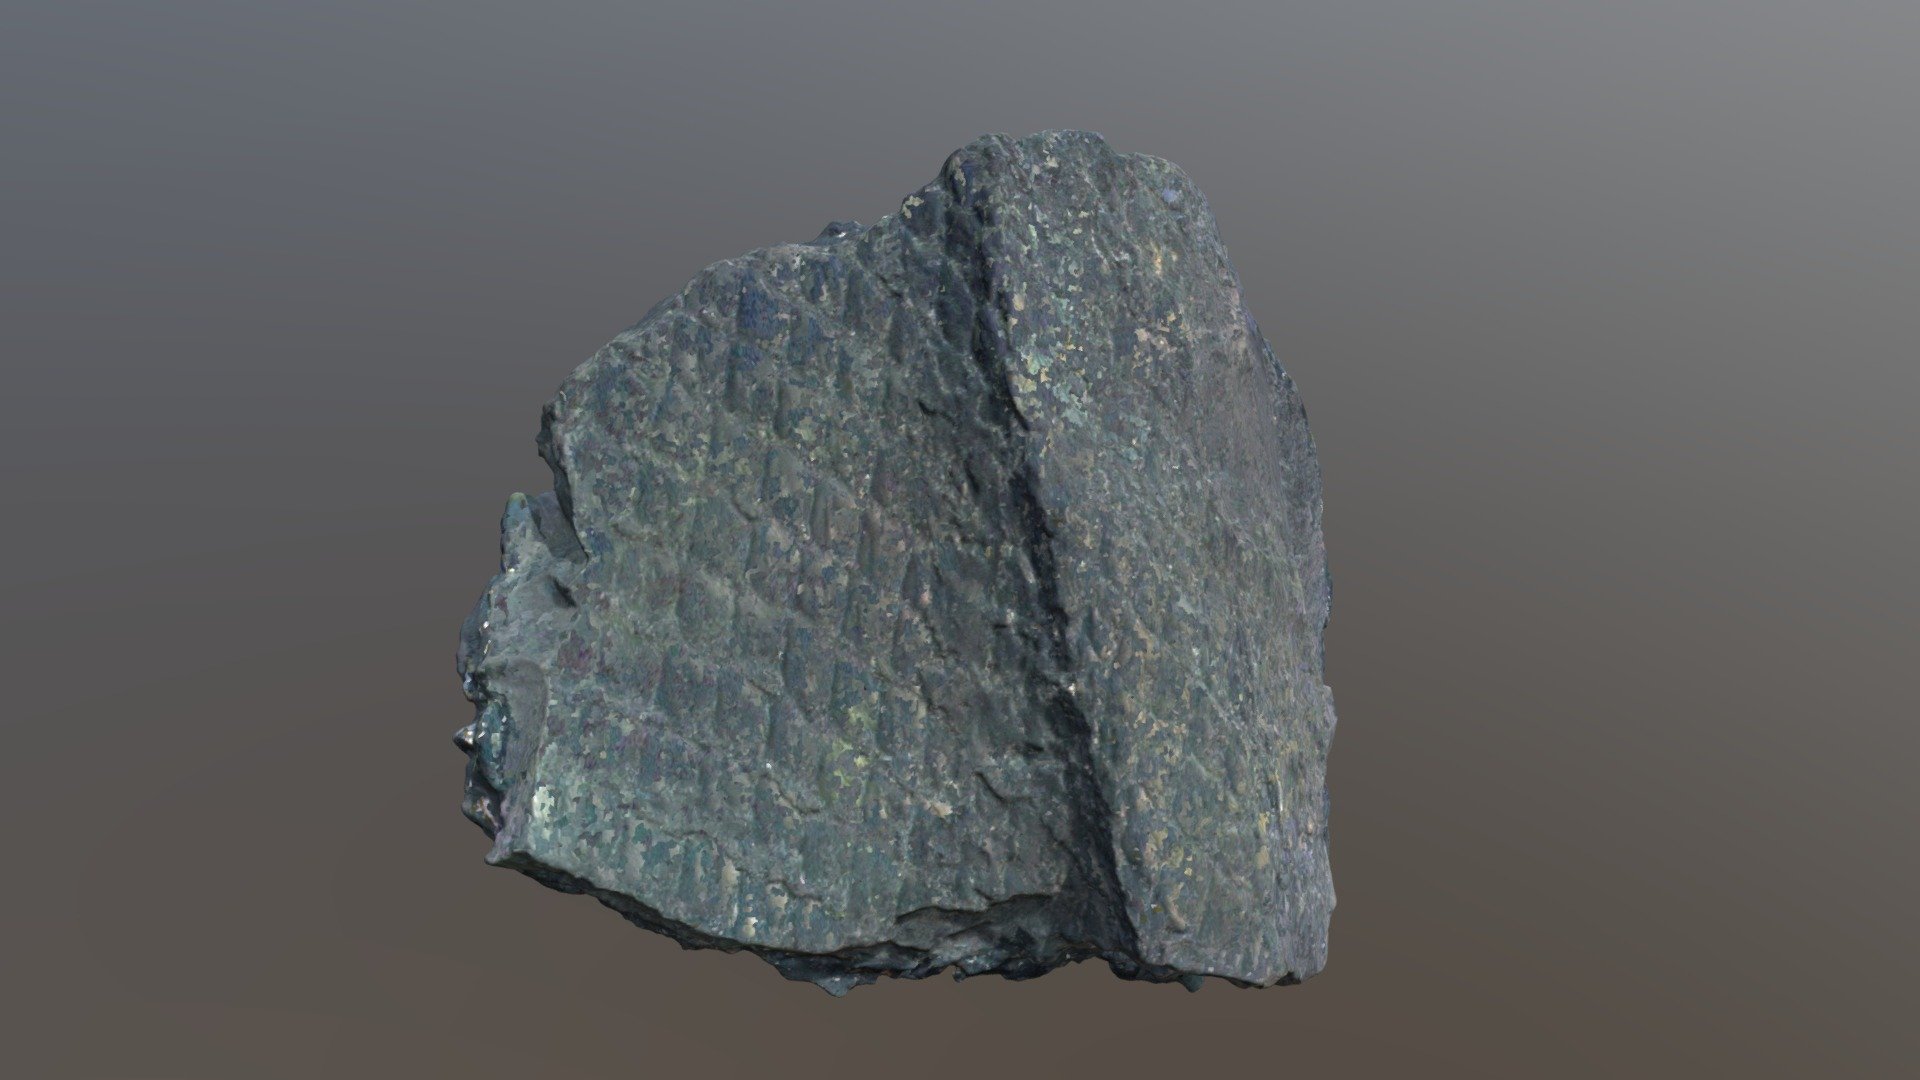 Lepidodendron fossil (VCU_3D_3007)